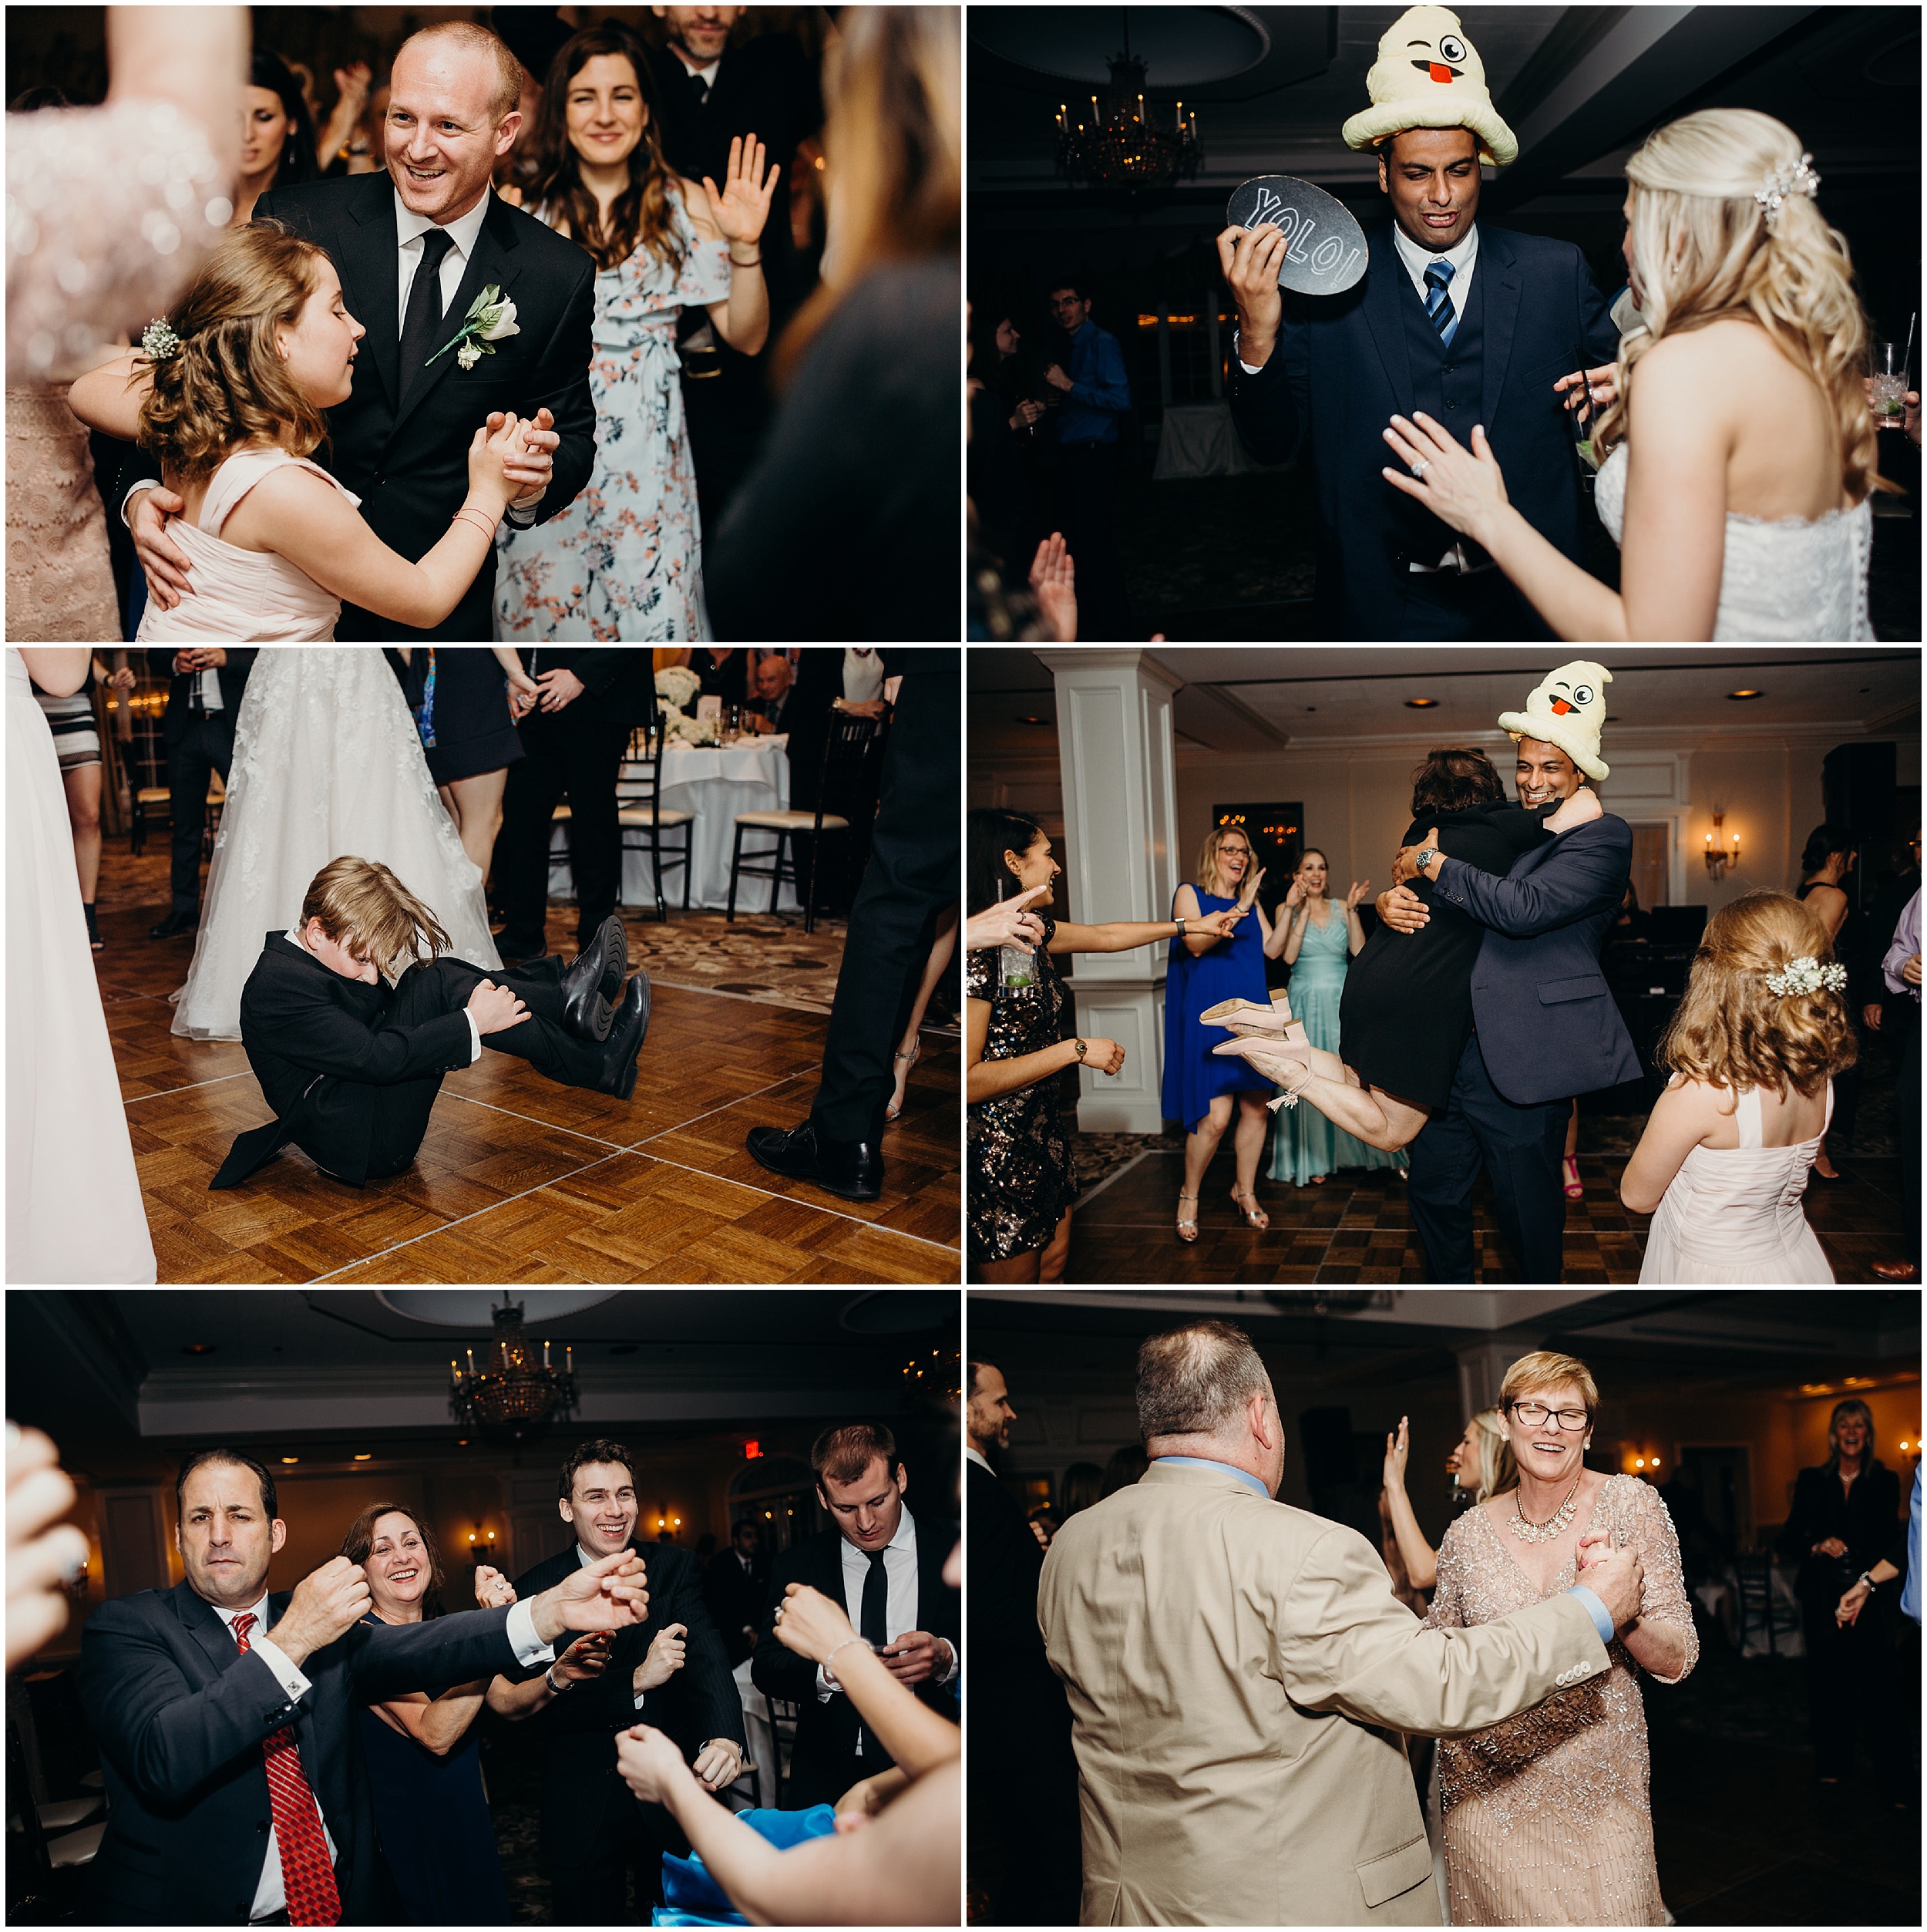 wedding guests dance during a reception at the upper montclair country club in montclair, new jersey